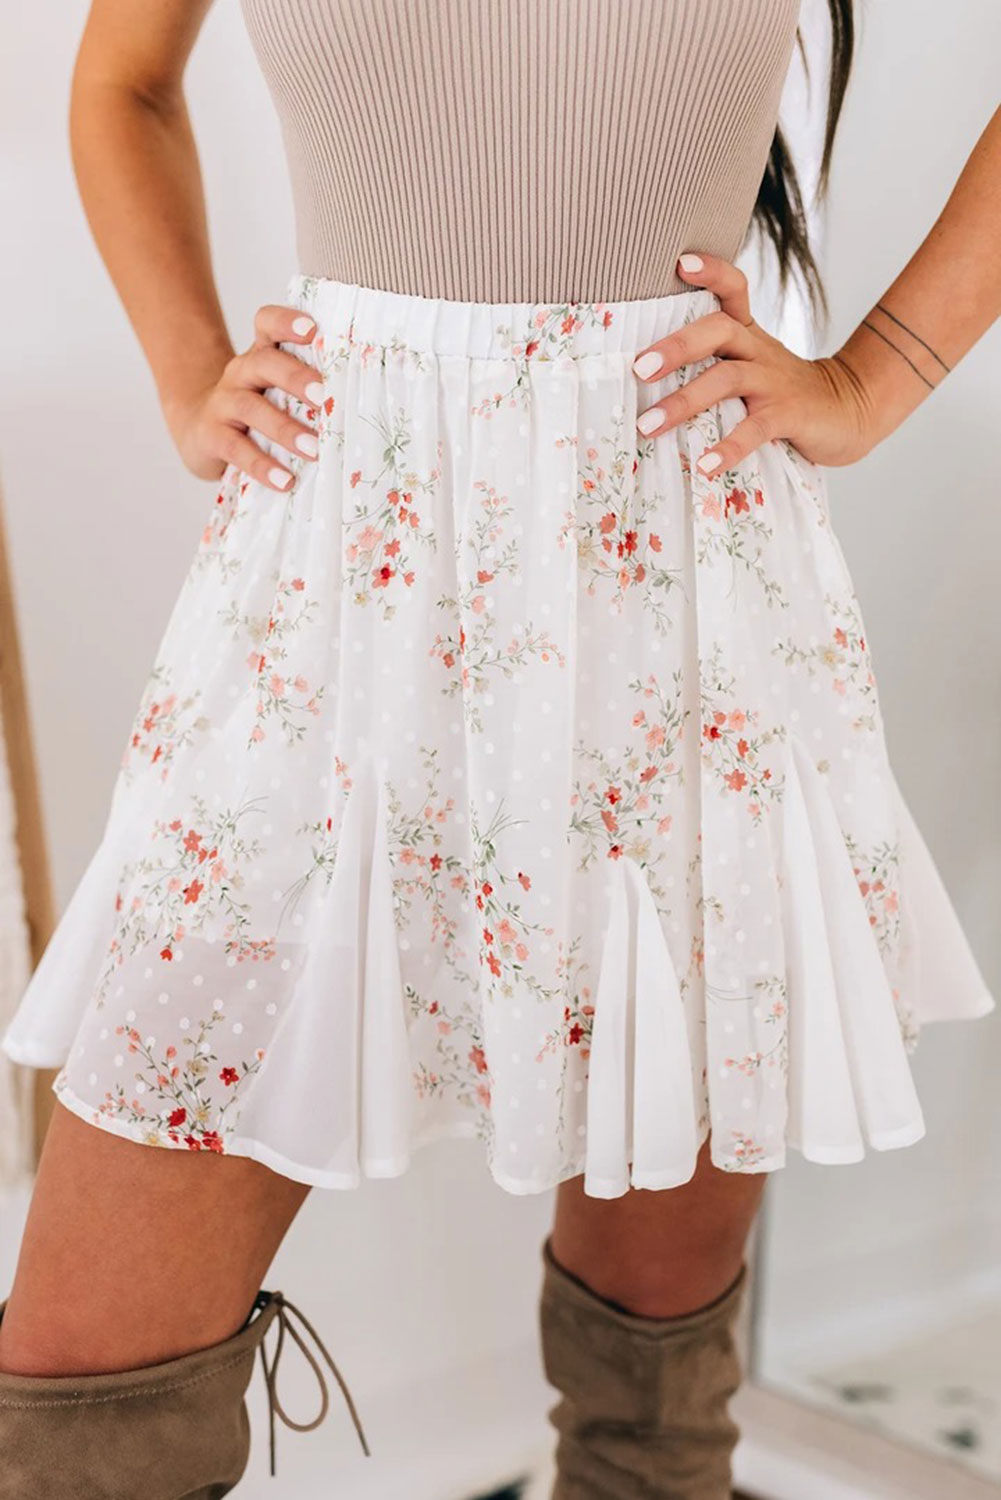 Wholesale Other Category, Cheap Floral Mini Skirt with Ruffled Hemline ...